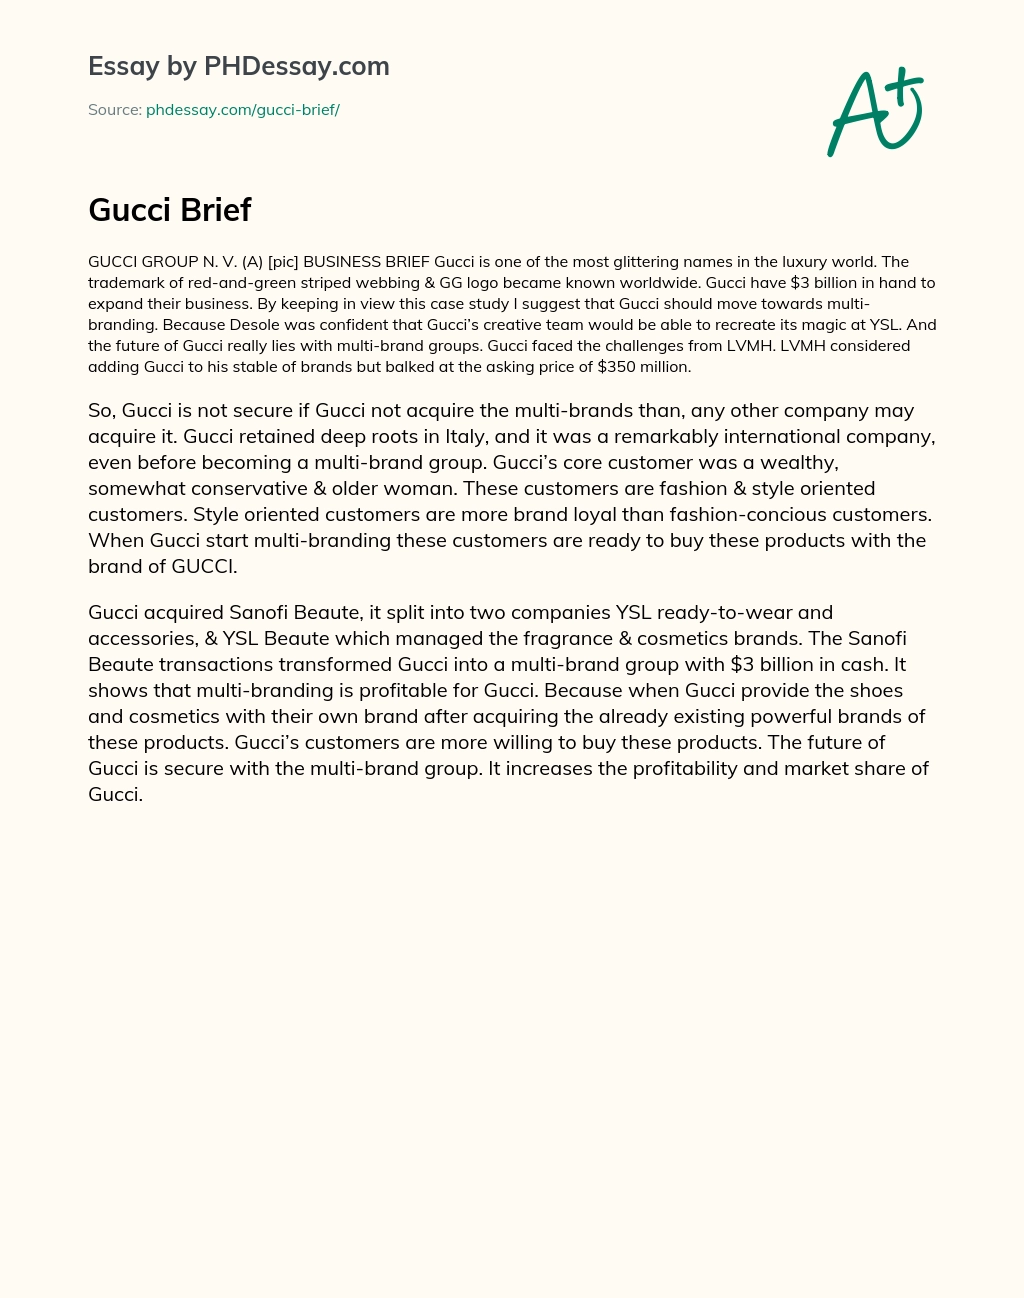 Gucci Group N.V. – Business Brief: The Future Lies in Multi-Branding essay